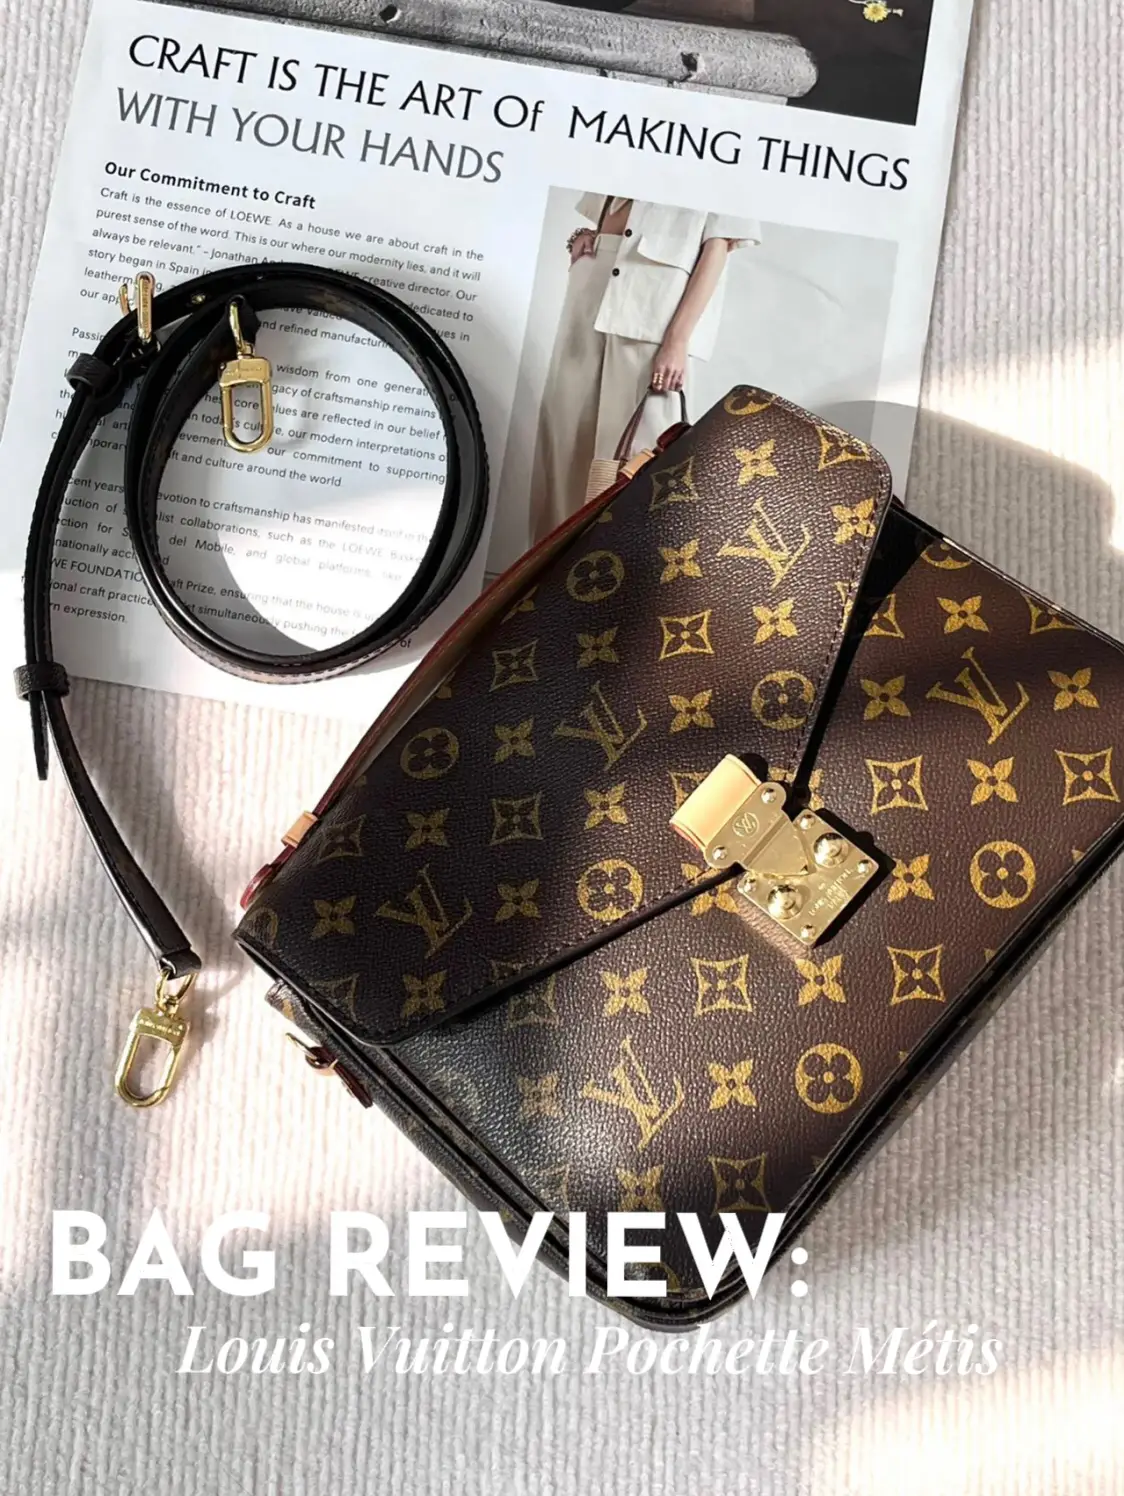 Pochette Metis Versus The Pochette Metis East West DHgate Dupe Bags -  Opinions &:What Fits In My Bag